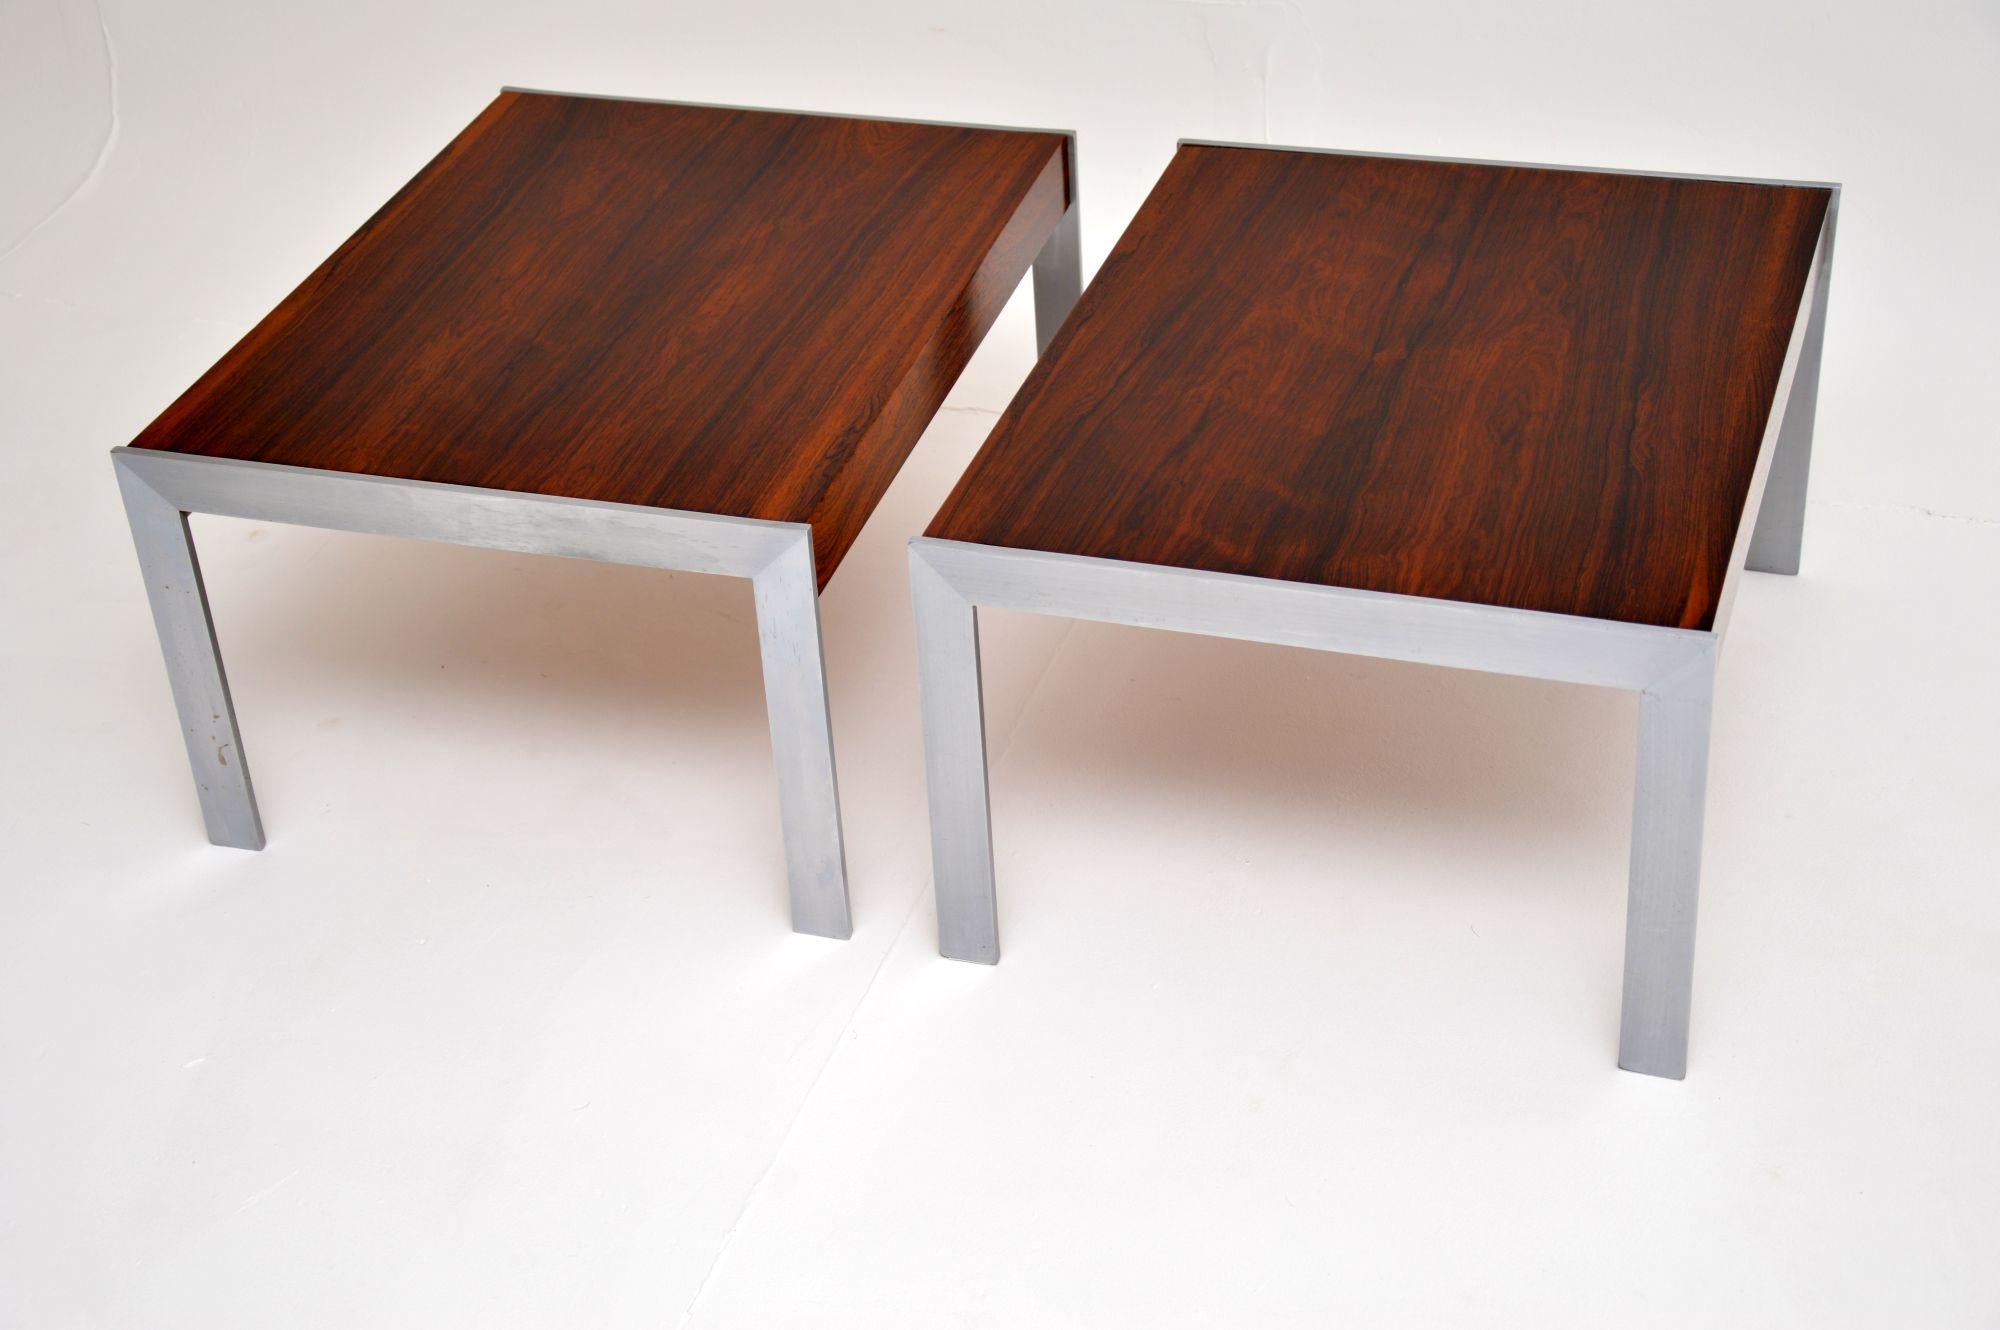 Late 20th Century 1970's Pair of Wood & Chrome Side Tables by Merrow Associates